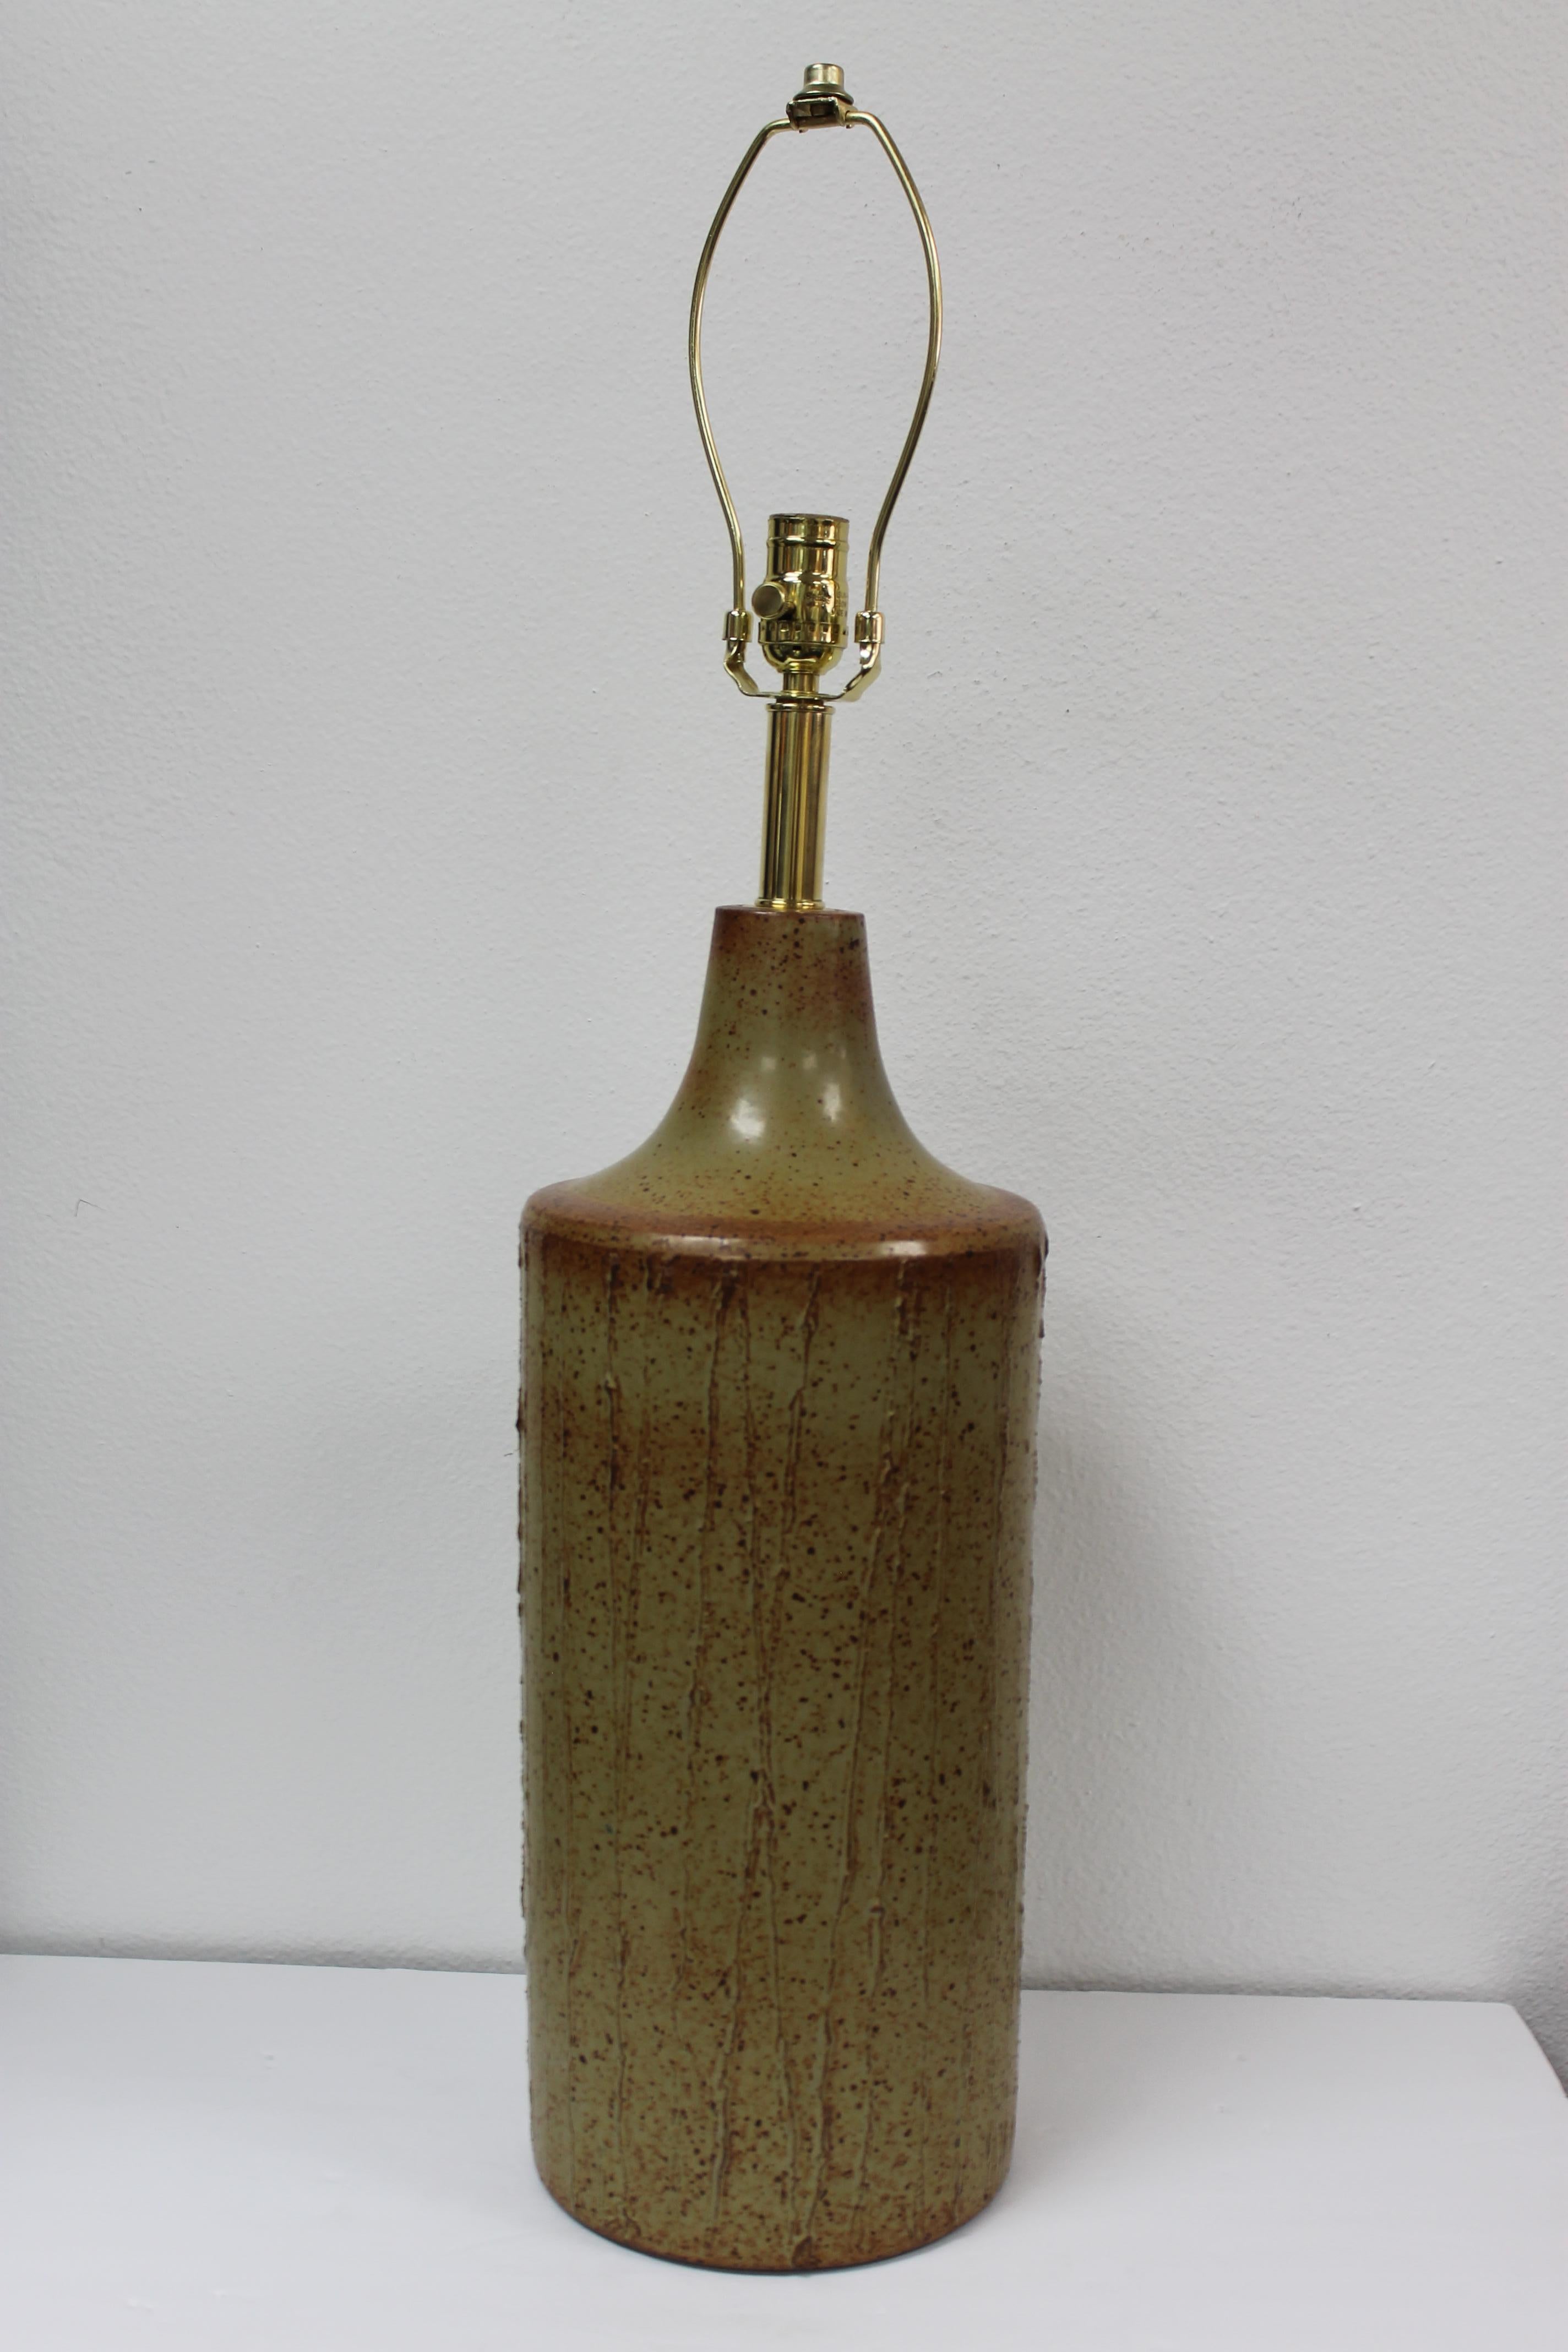 Pottery lamp by David Cressey. Lamp measures 24